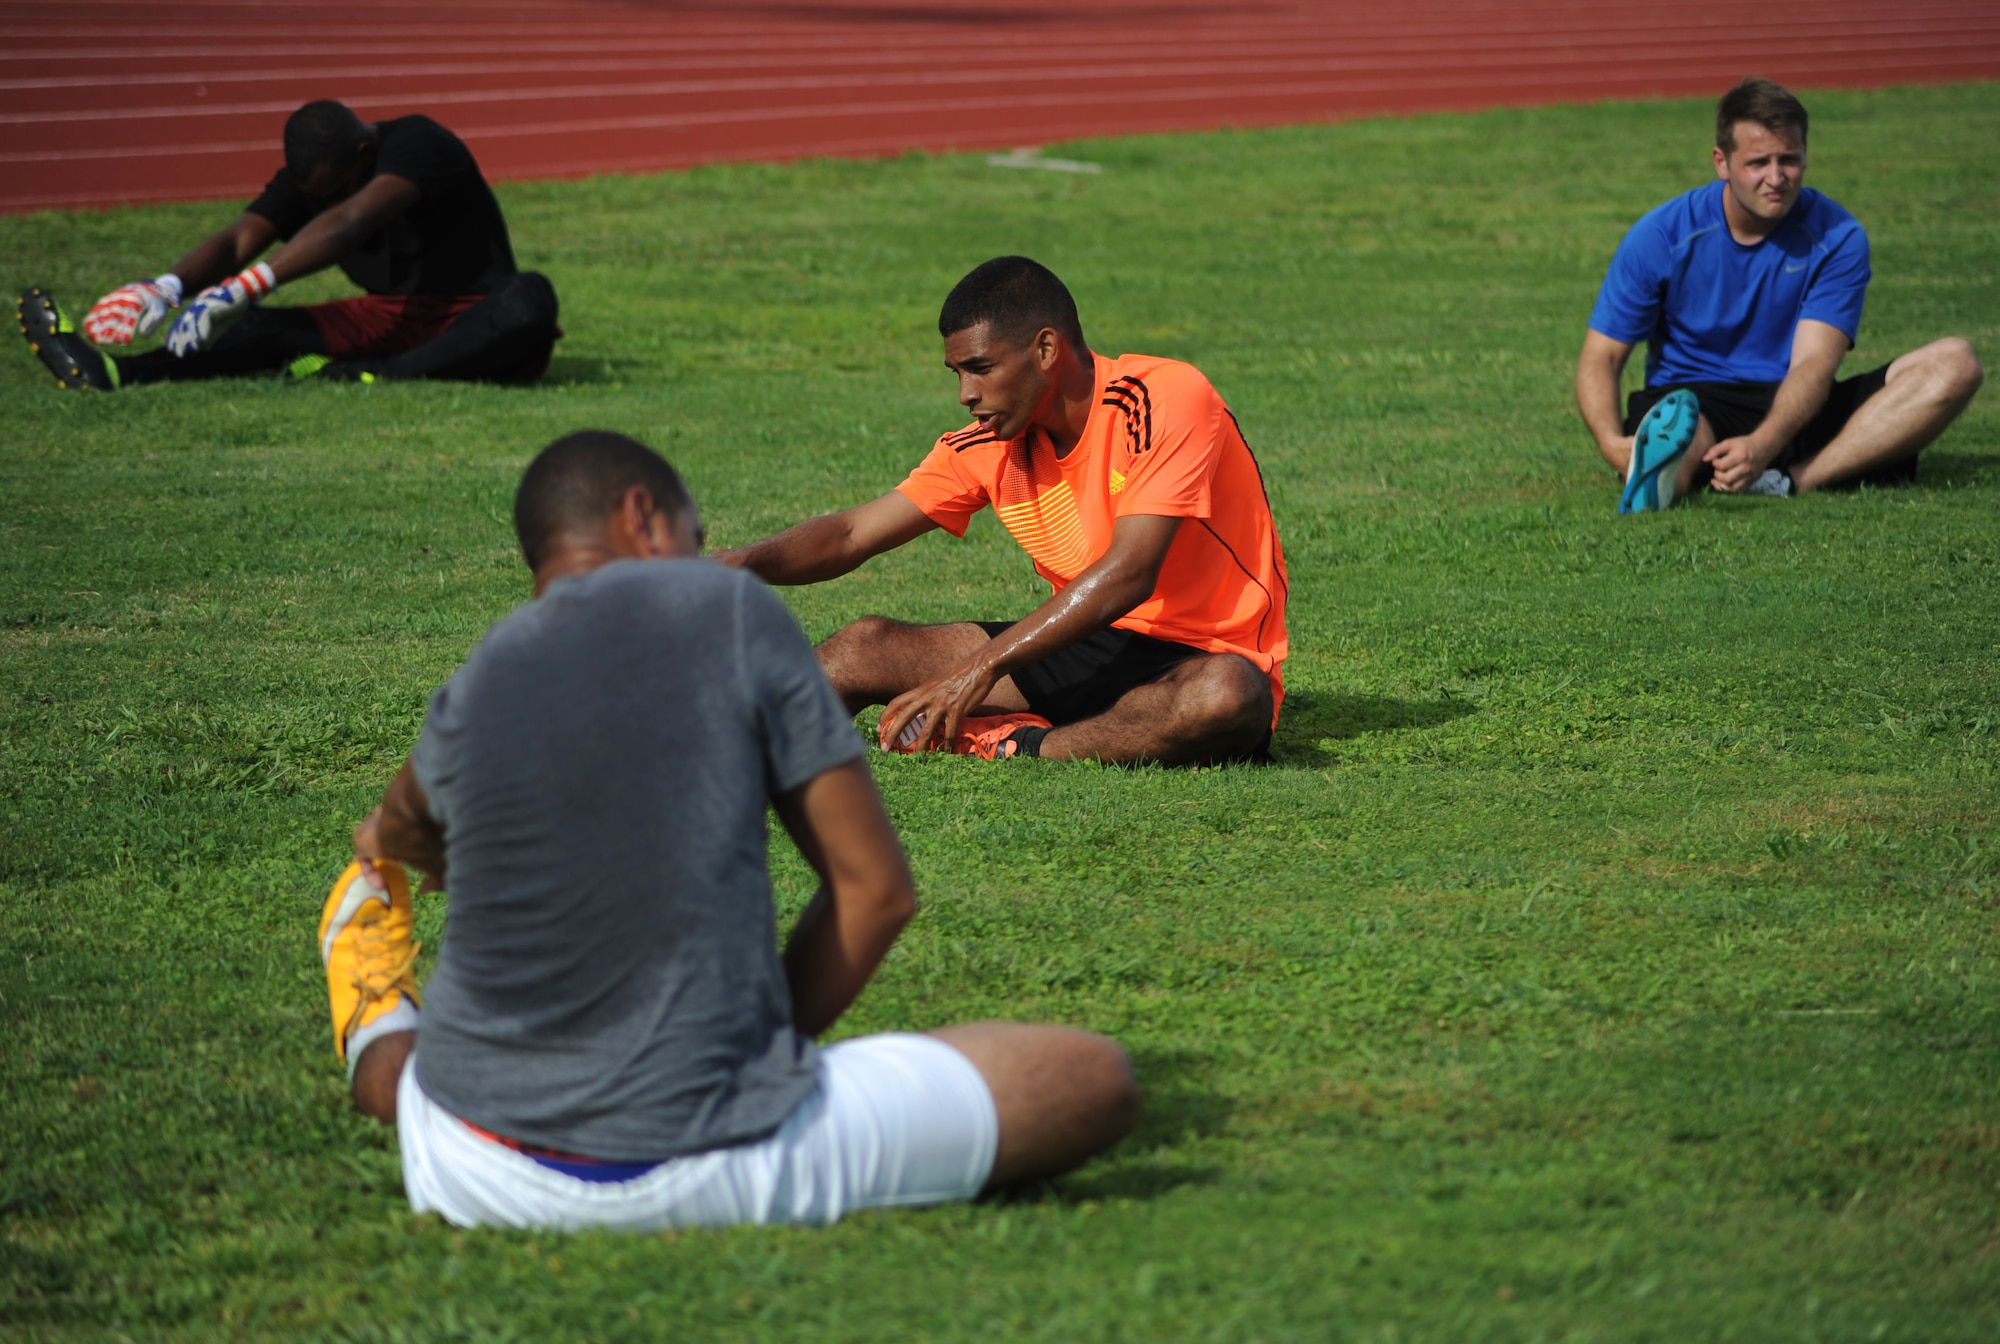 Members of MacDill Football Club stretch before training drills during a team practice at MacDill Air Force Base, Fla., August 3, 2016. The team is preparing to compete in the Defender’s Cup, a national military tournament hosted at Lackland AFB, Texas September 2, 2016. (U.S. Air Force photo by Airman Adam R. Shanks)